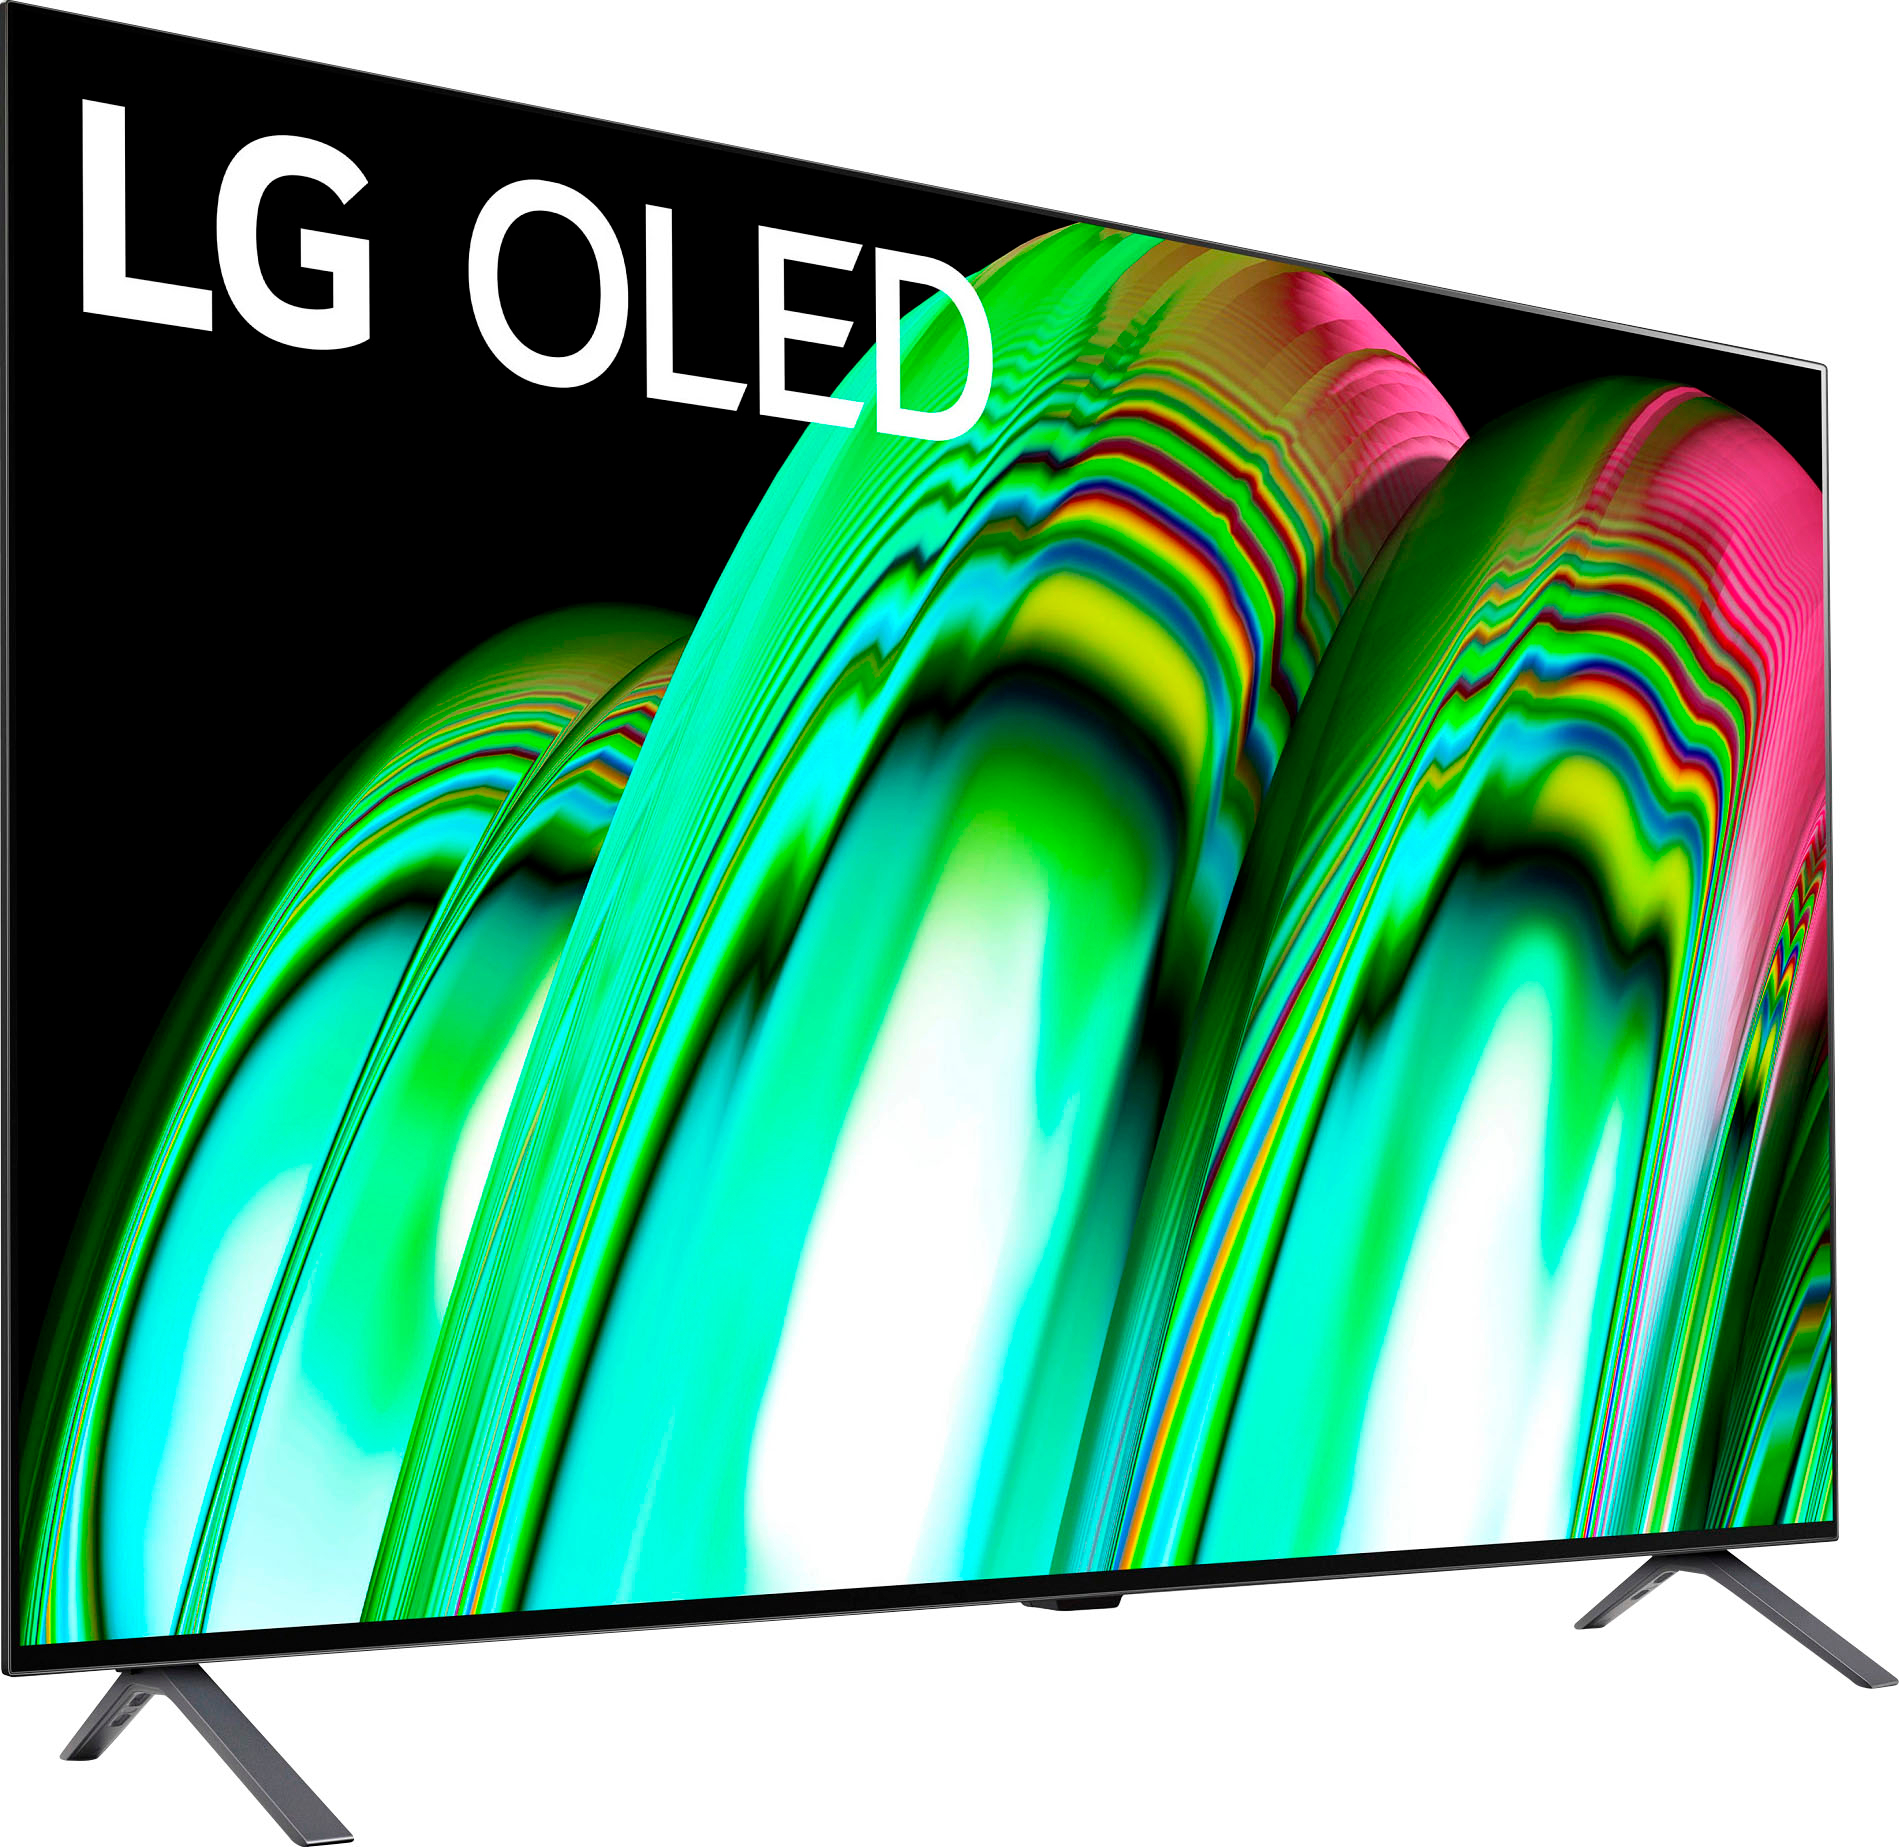 You Can Pick Up a Massive 77 LG 4K OLED Smart TV for Only $1800 - IGN